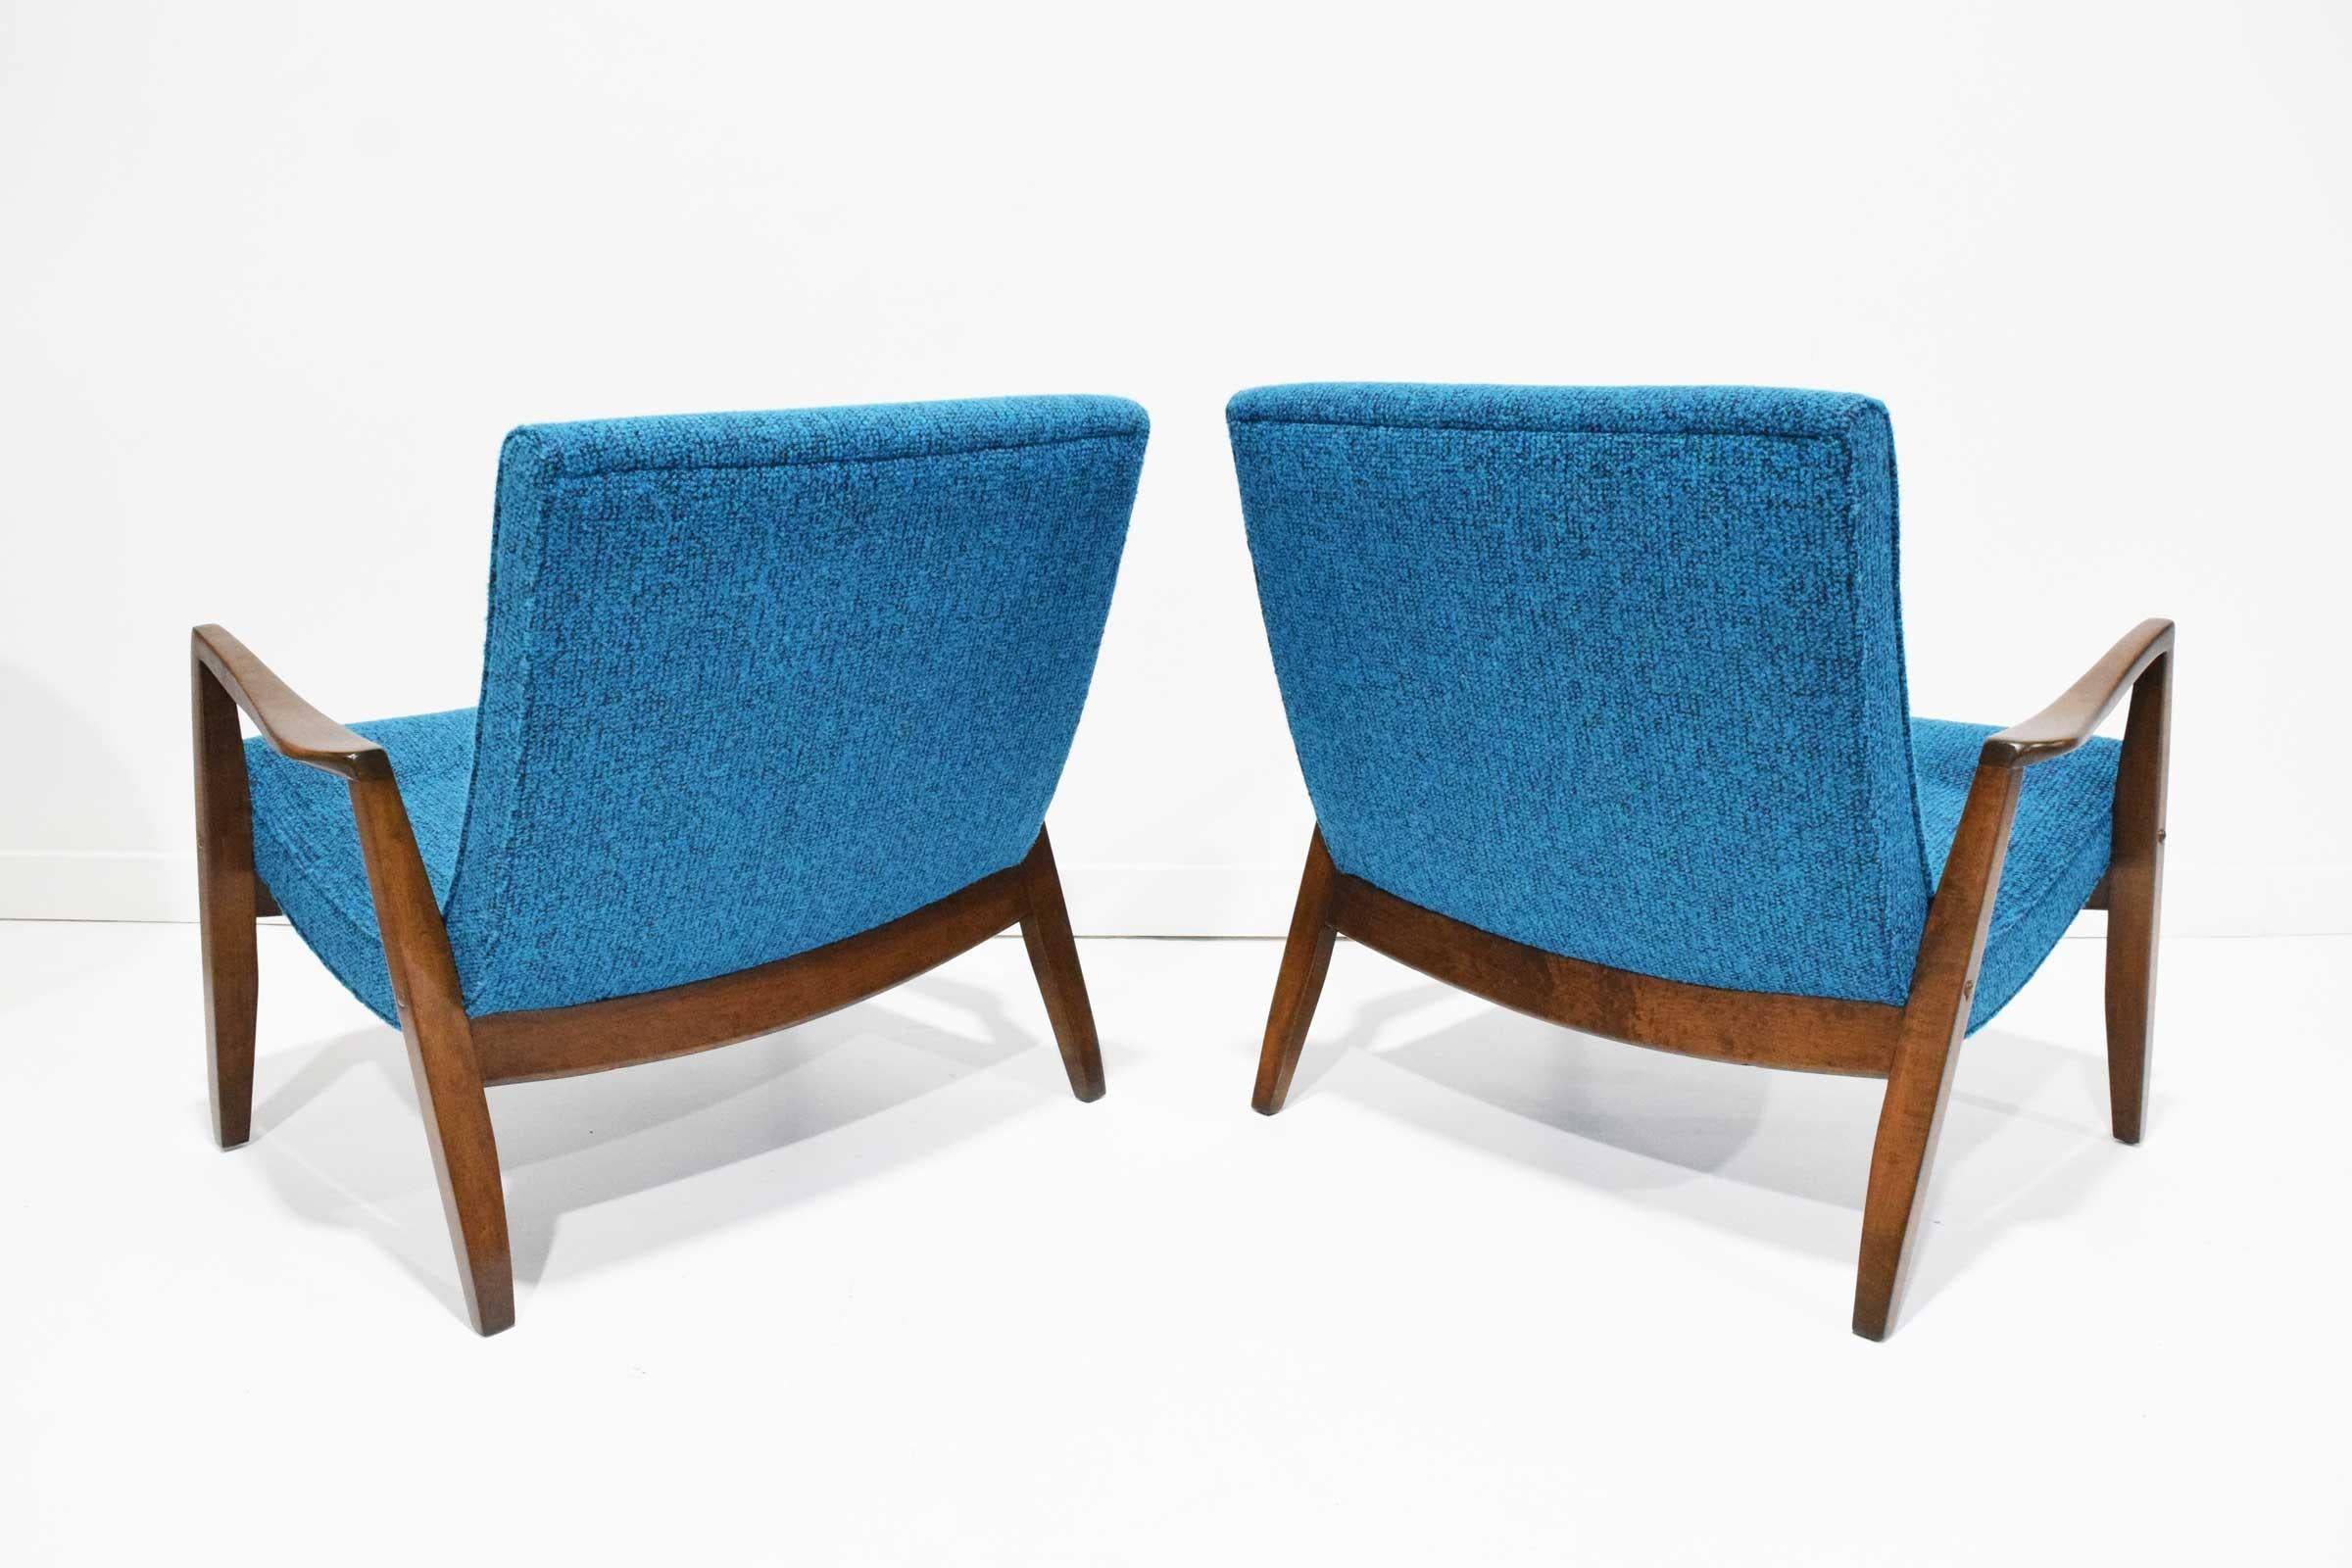 North American Pair of Milo Baughman Scoop Lounge Chairs in Knoll Upholstery For Sale